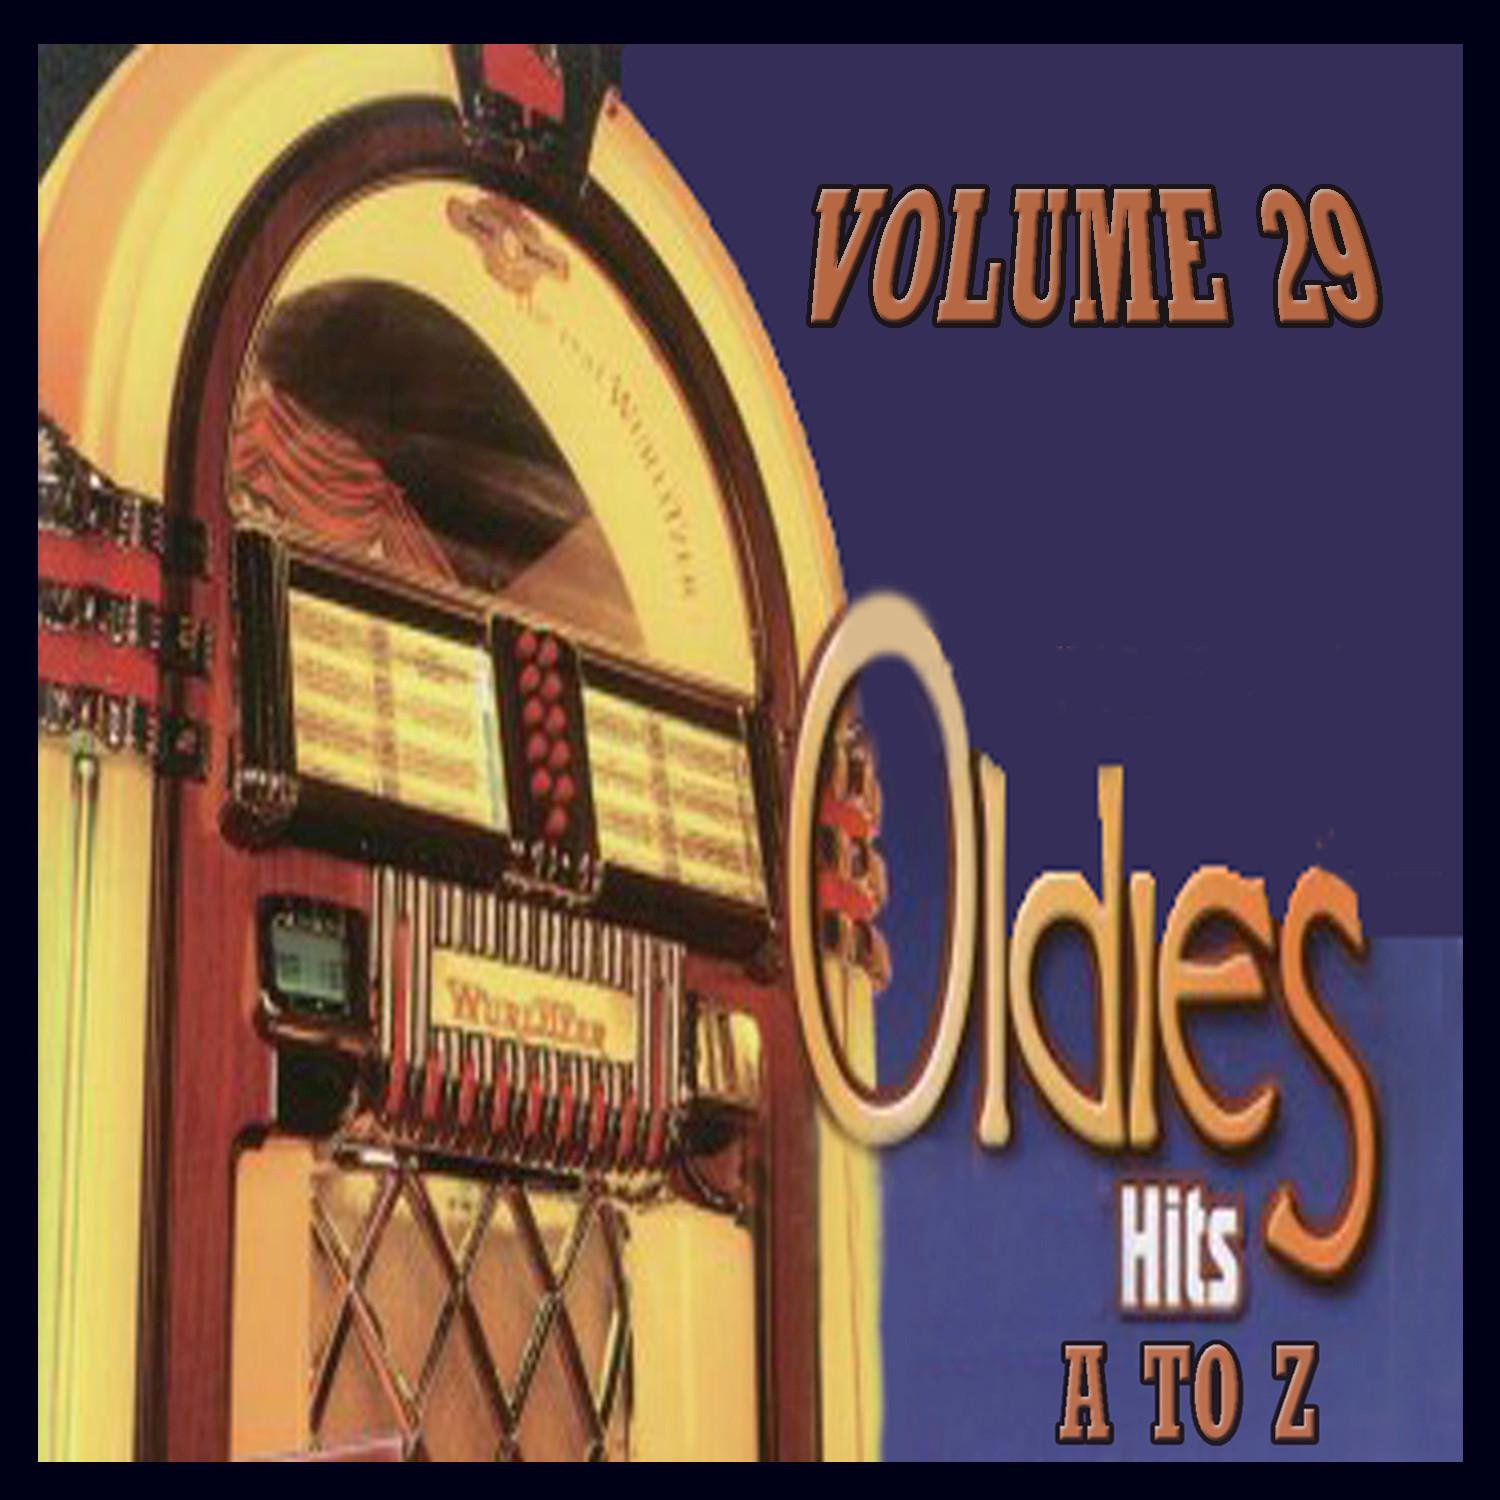 Oldies Hits A to Z, Vol. 29